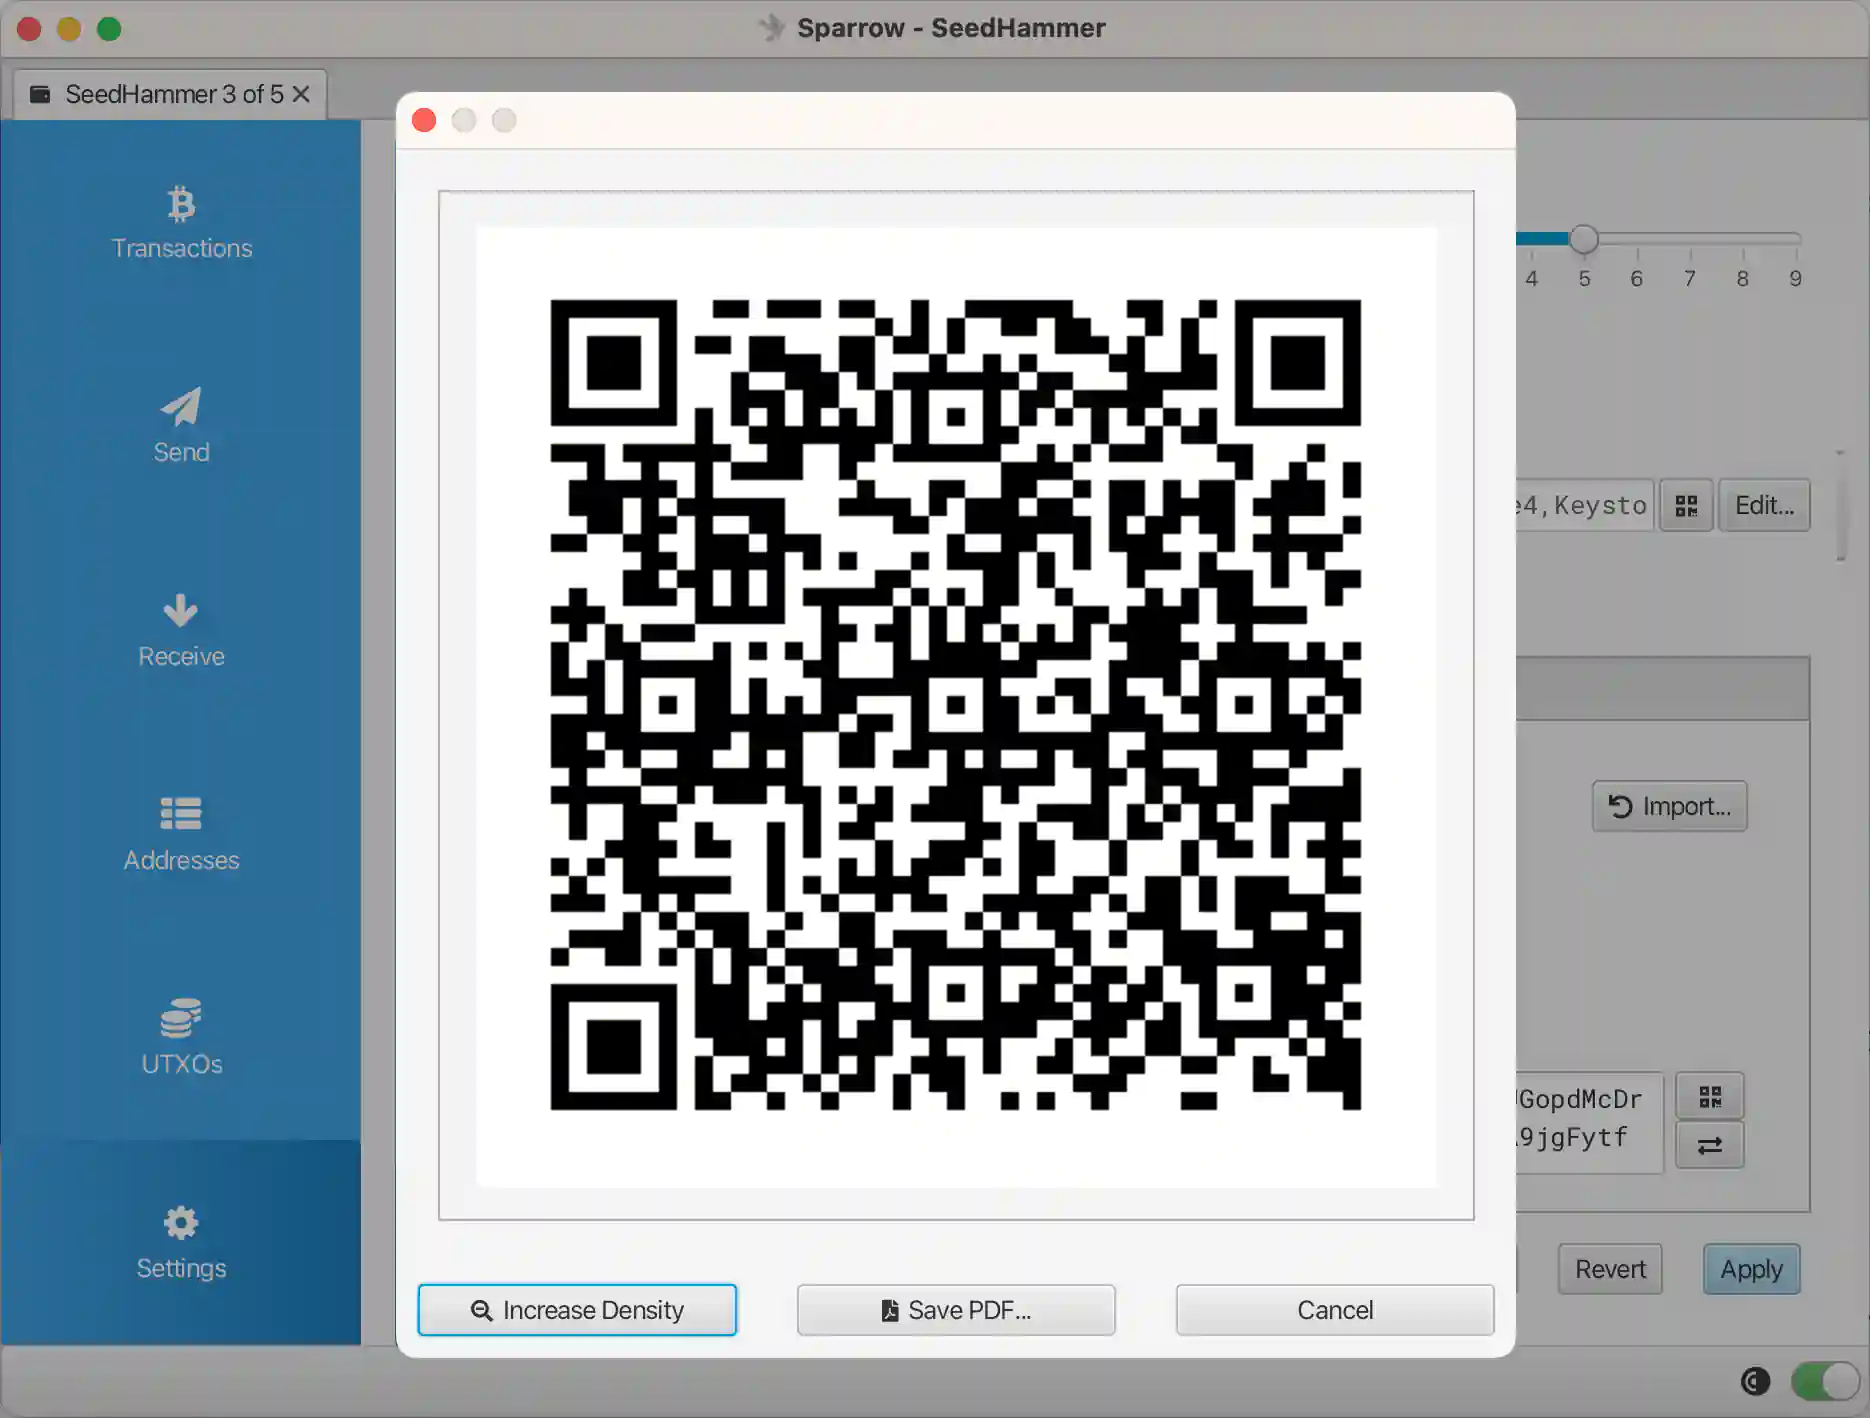 Scan the QR into Sparrow